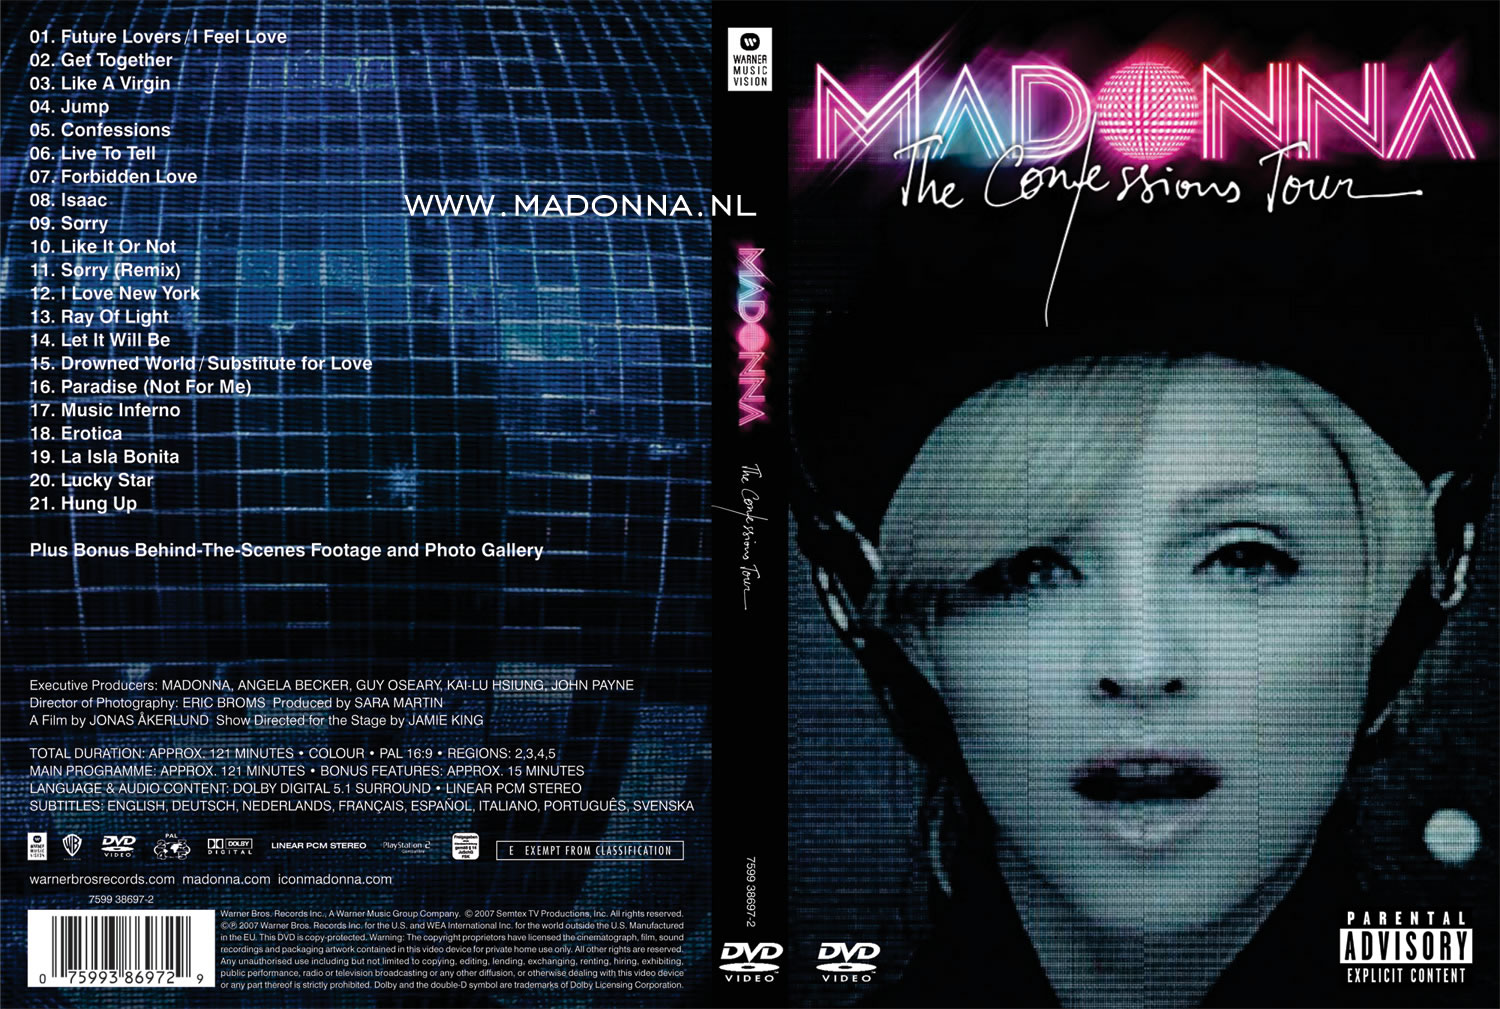 The Confessions Tour DVD sleeve